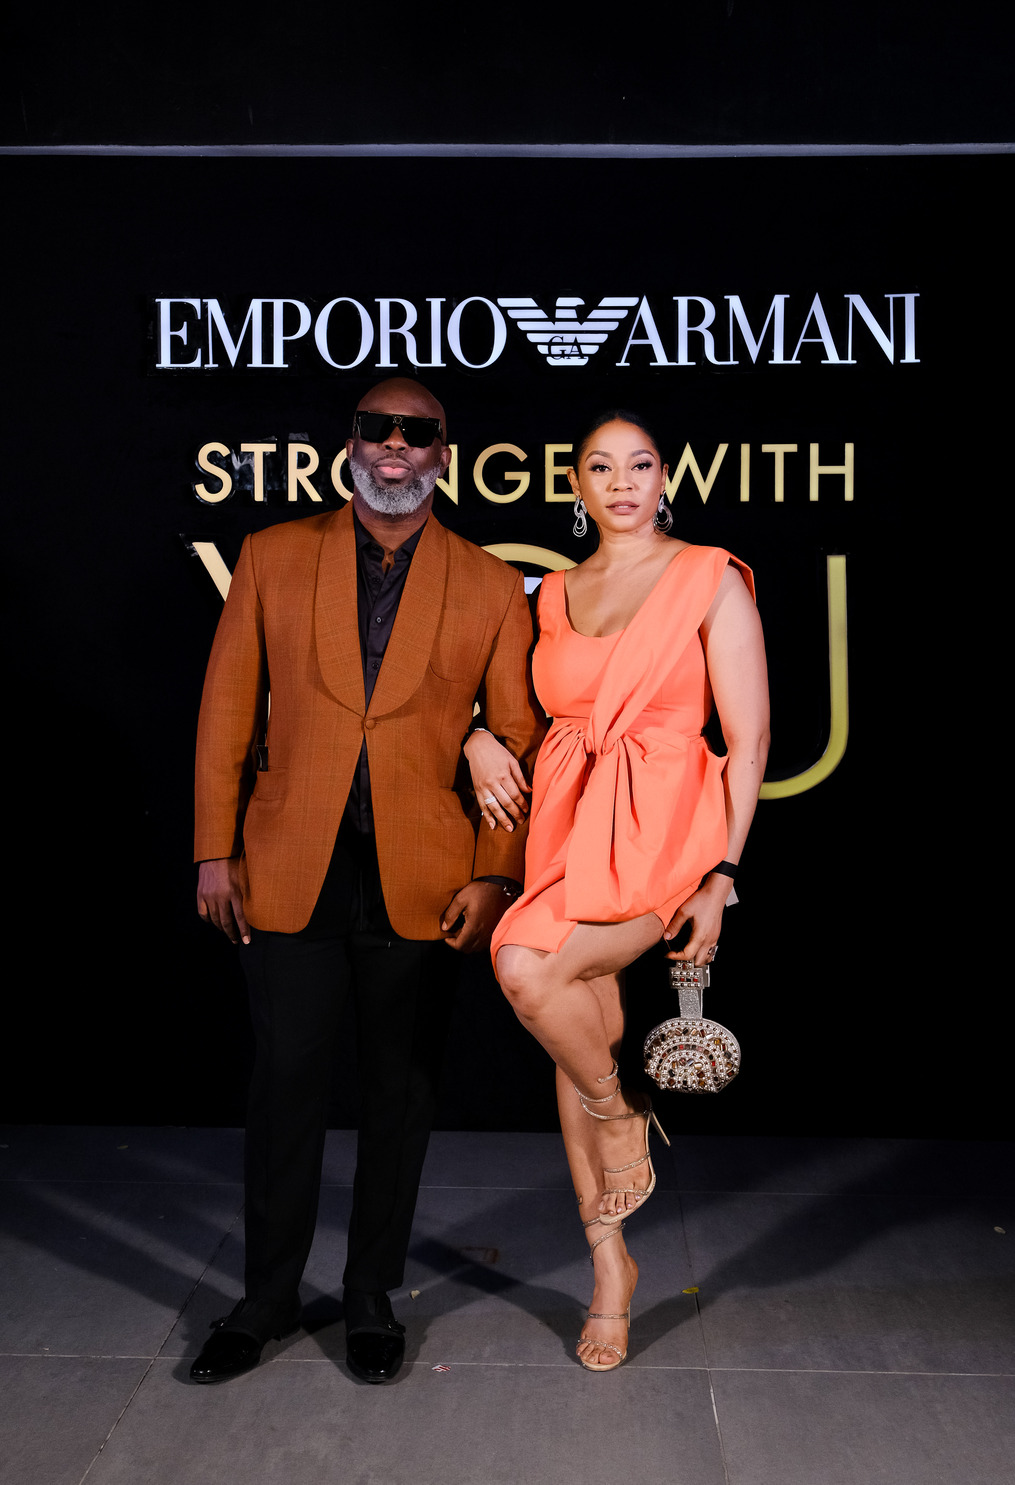 emporio-armani-stronger-with-you-style-rave